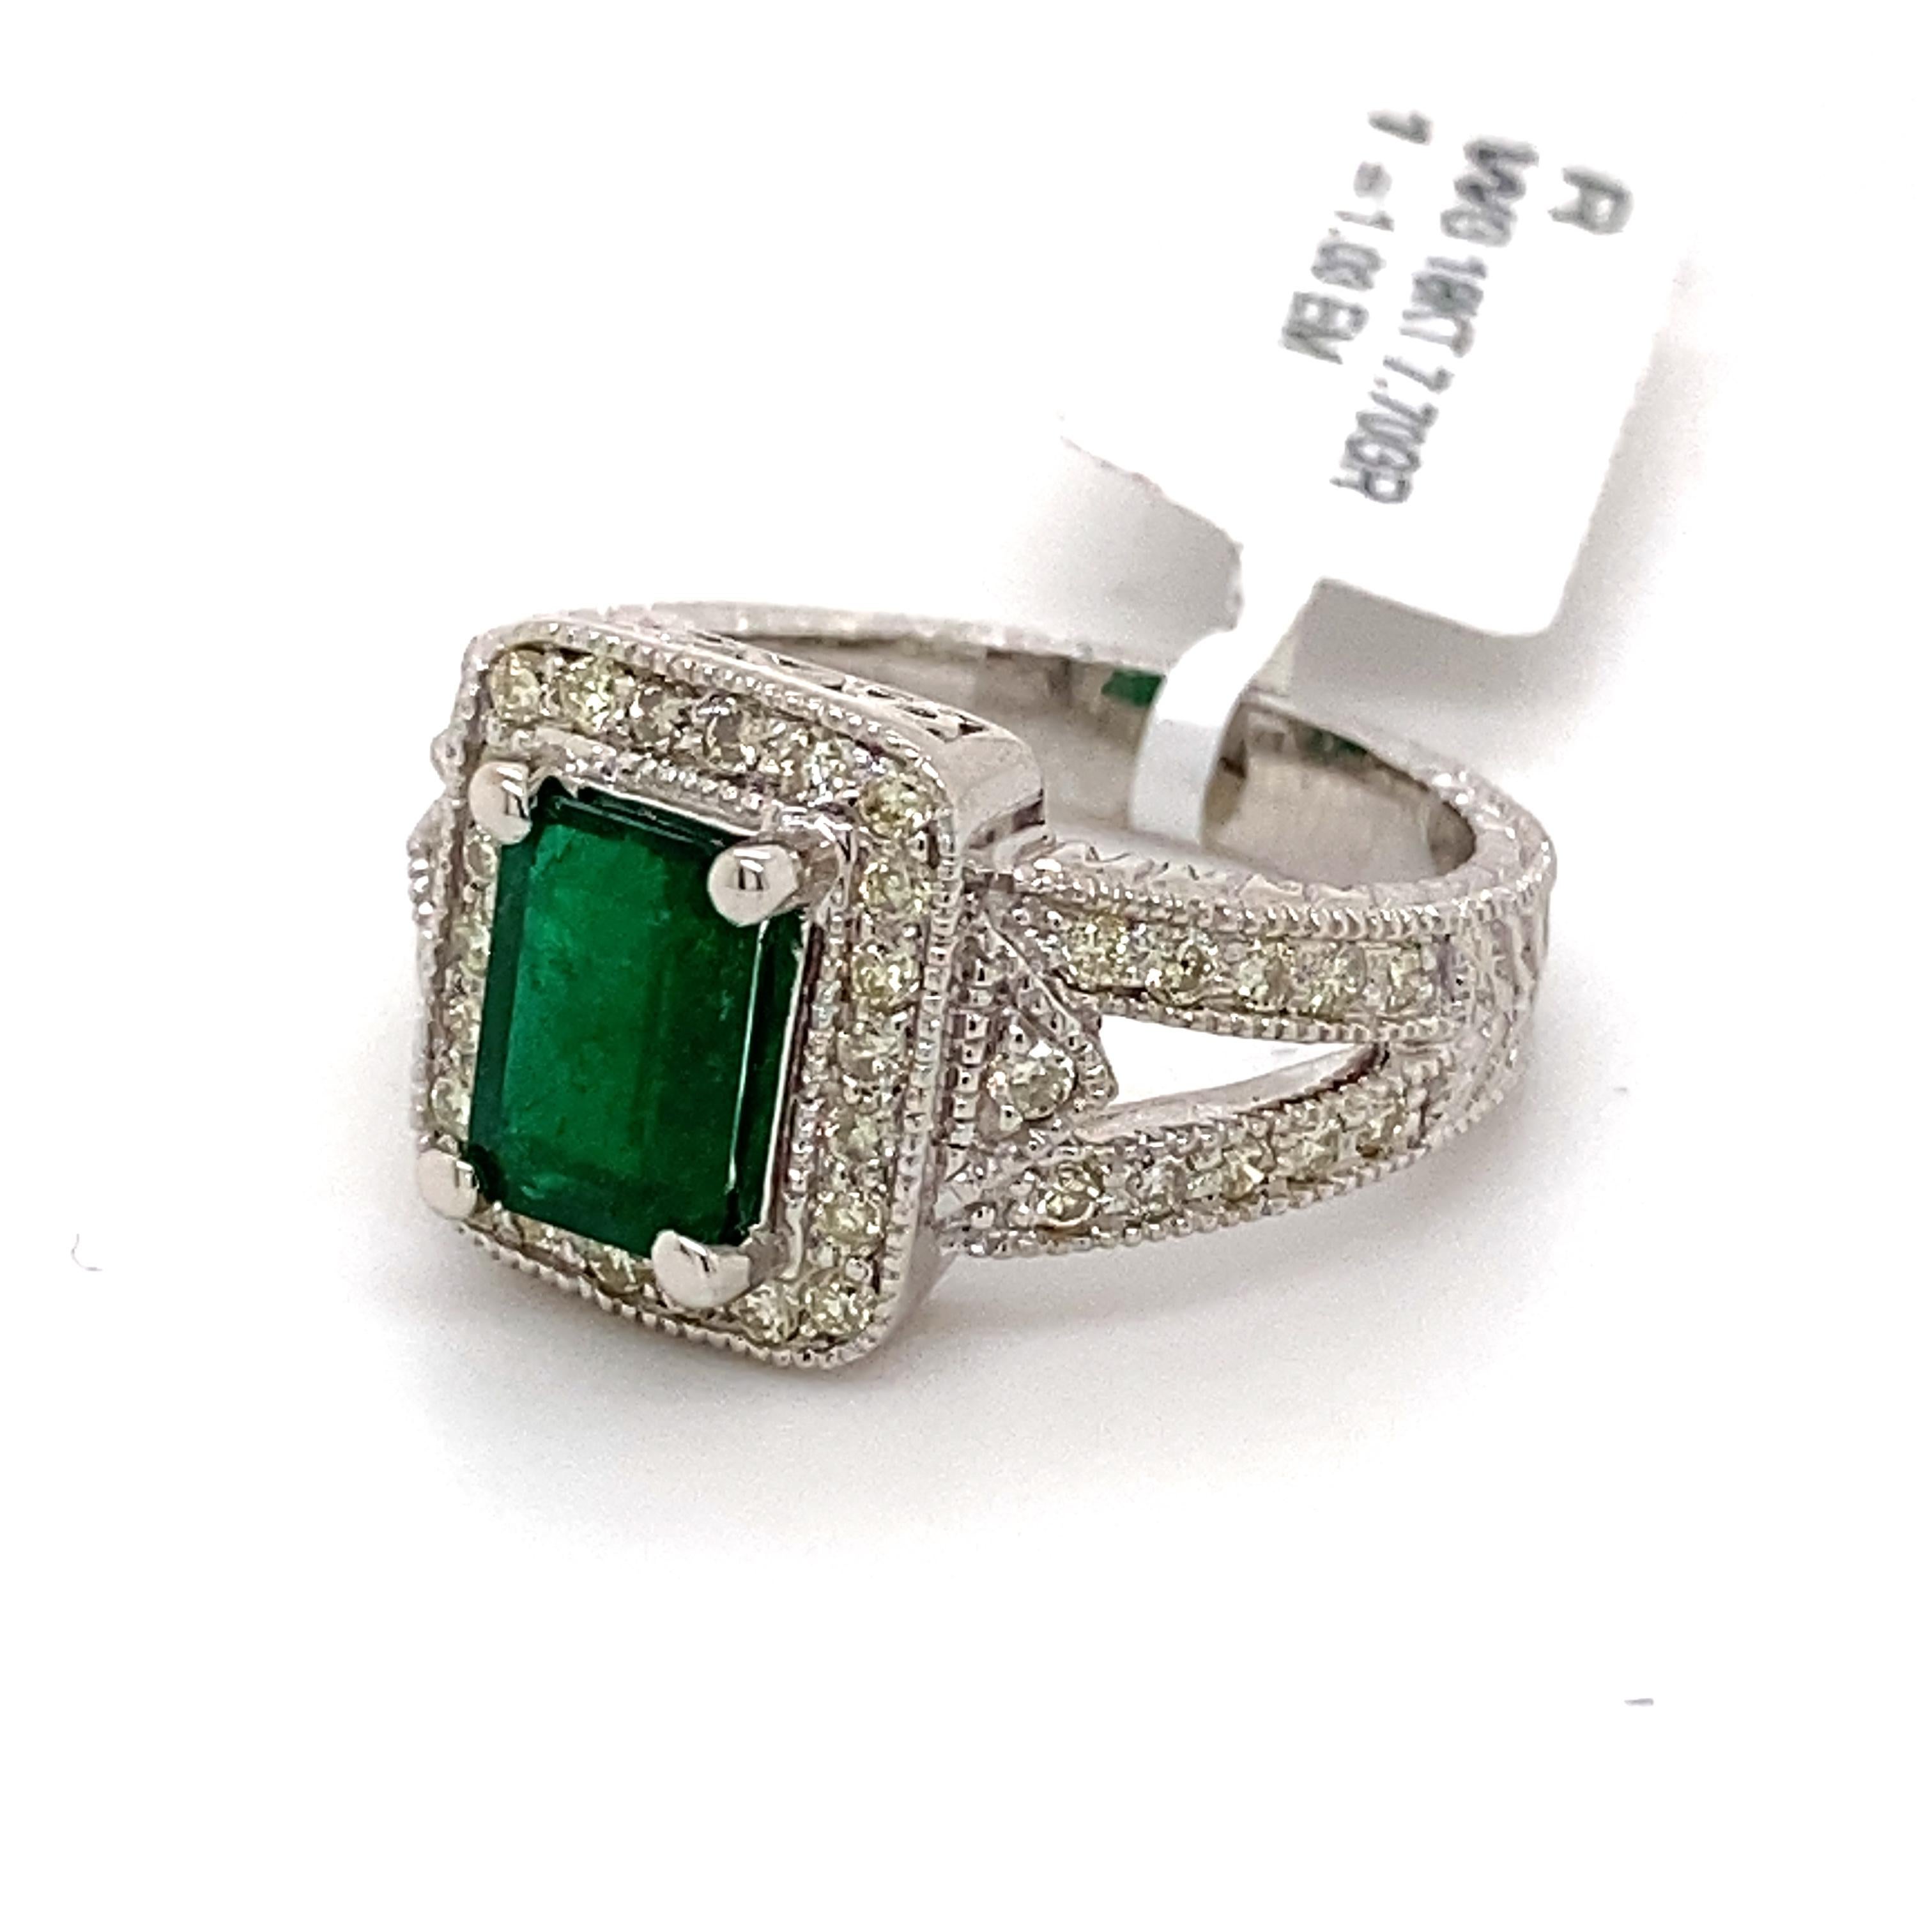 Emerald Cut Art Deco Style 1.73ctt Emerald with Diamond Halo Ring 18k White Gold For Sale